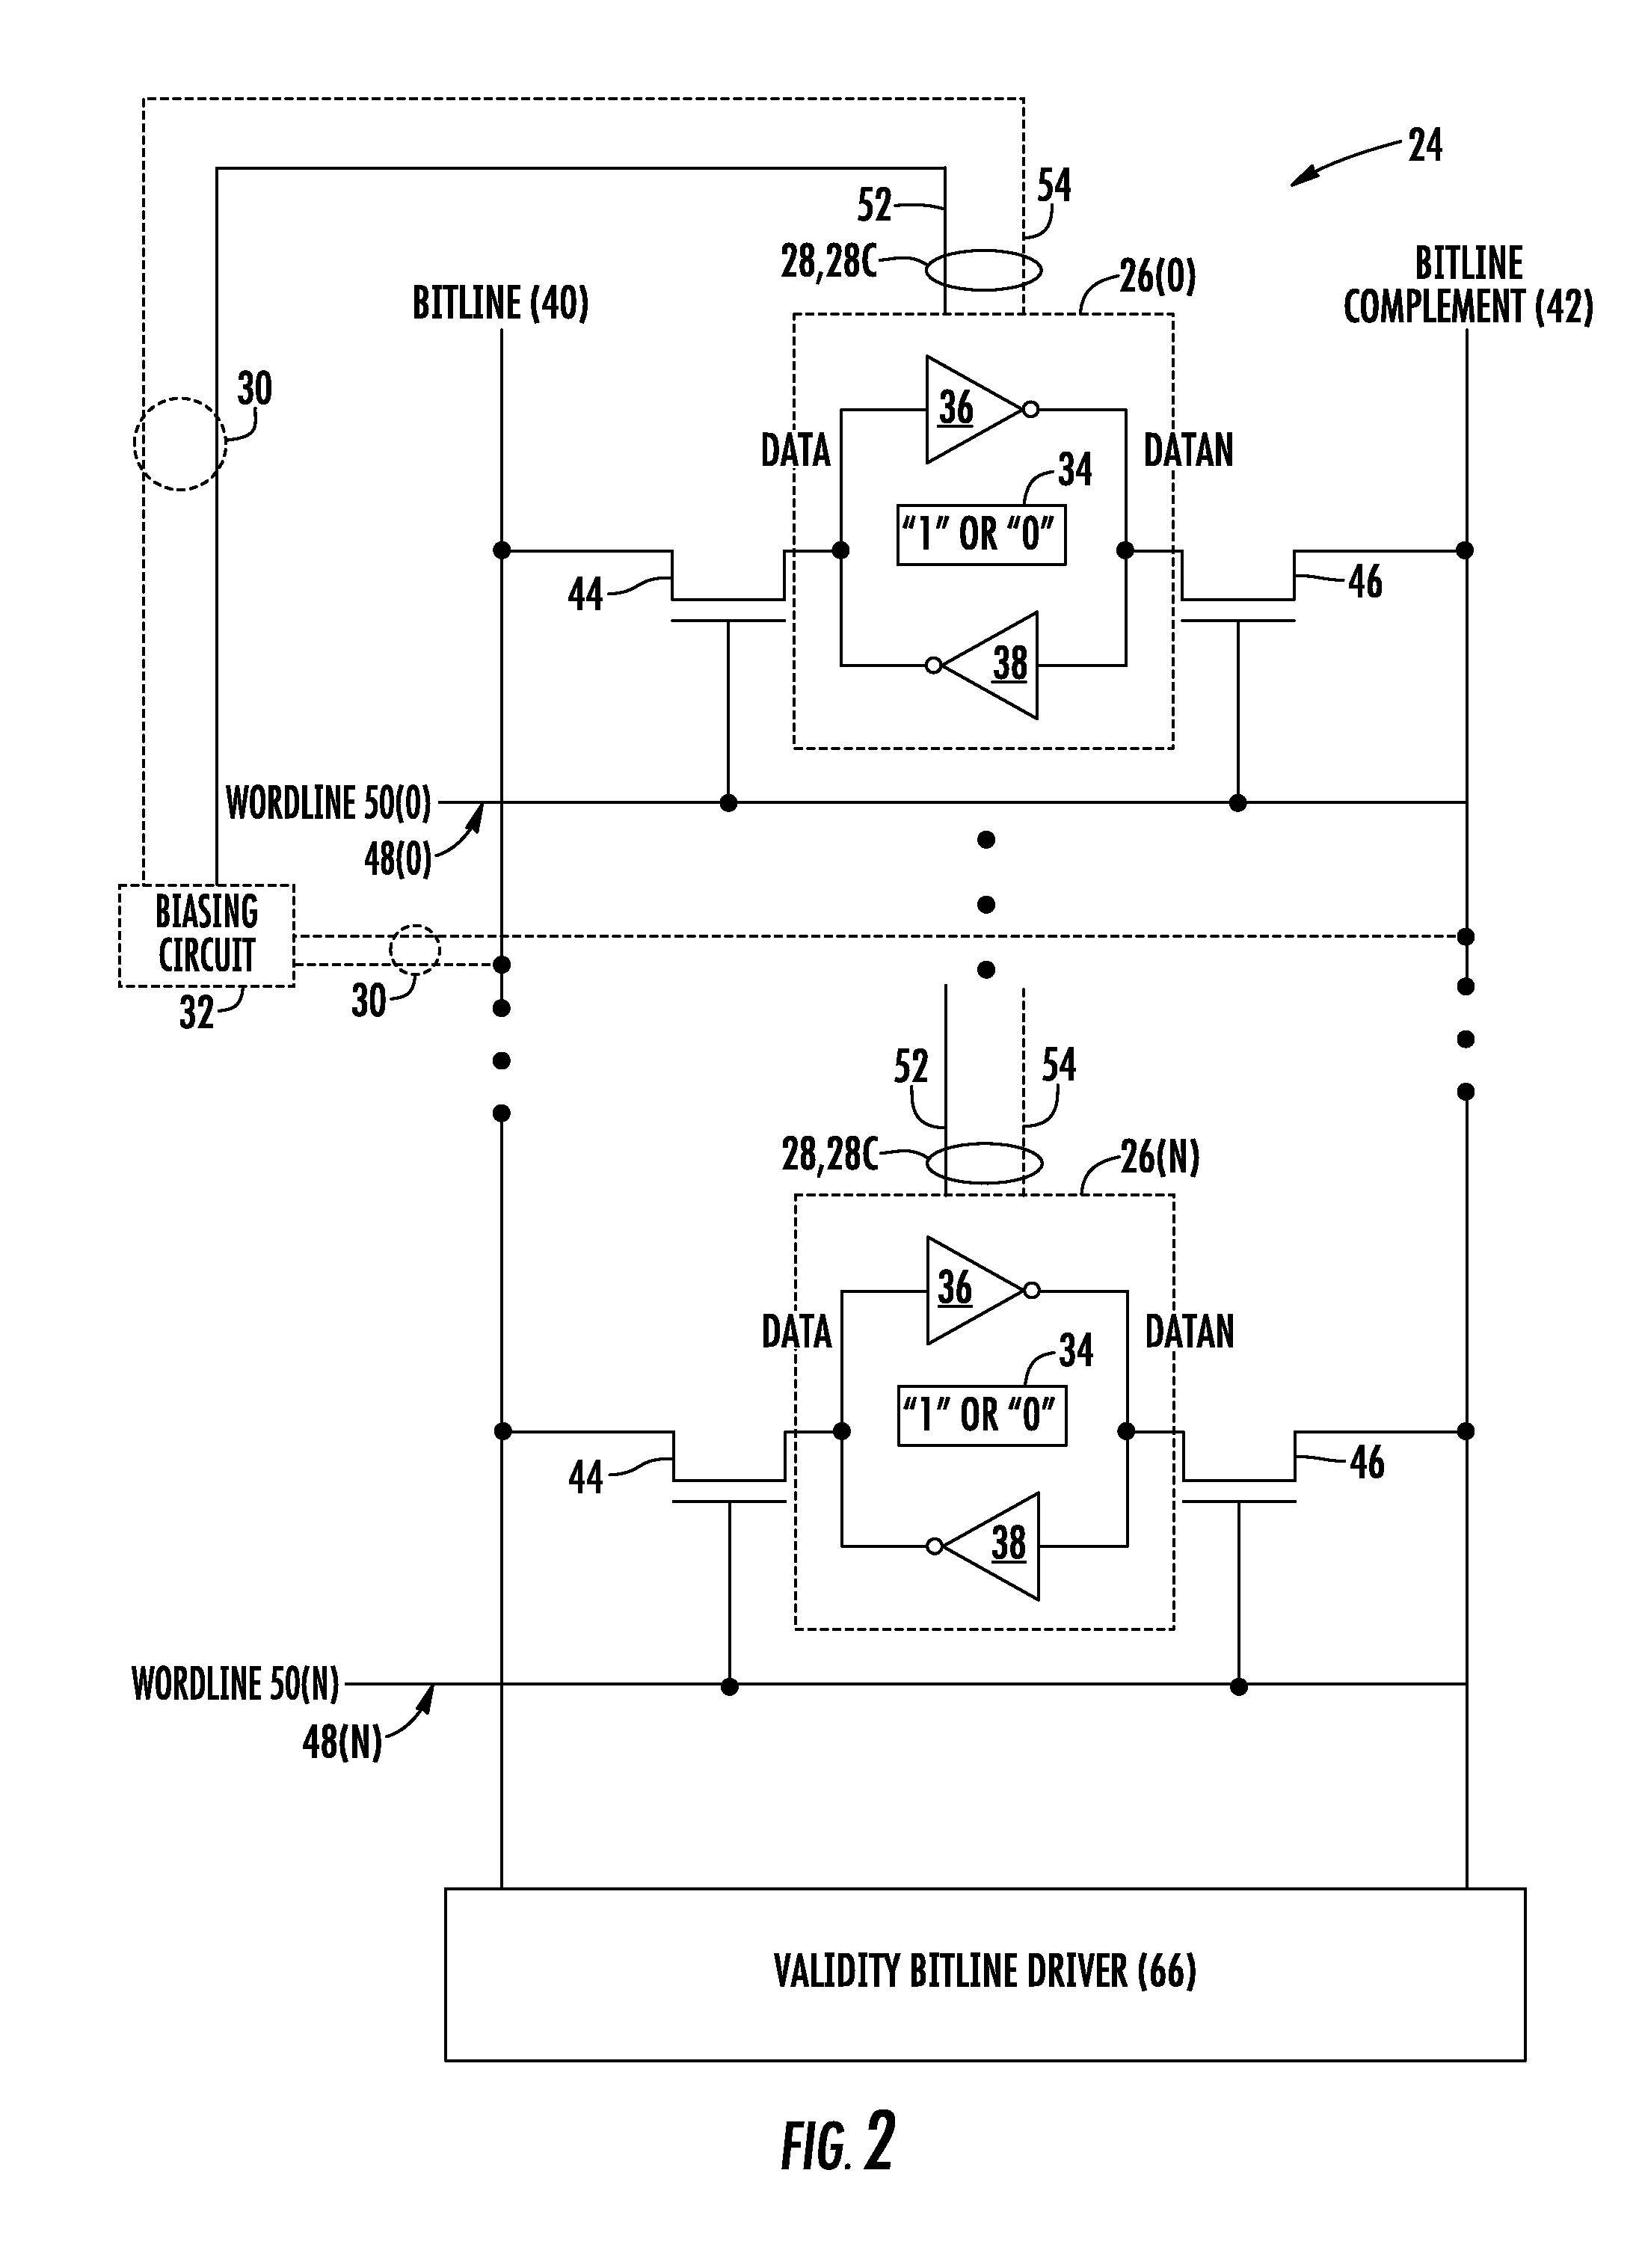 Circuits for voltage or current biasing static random access memory (SRAM) bitcells during SRAM reset operations, and related systems and methods